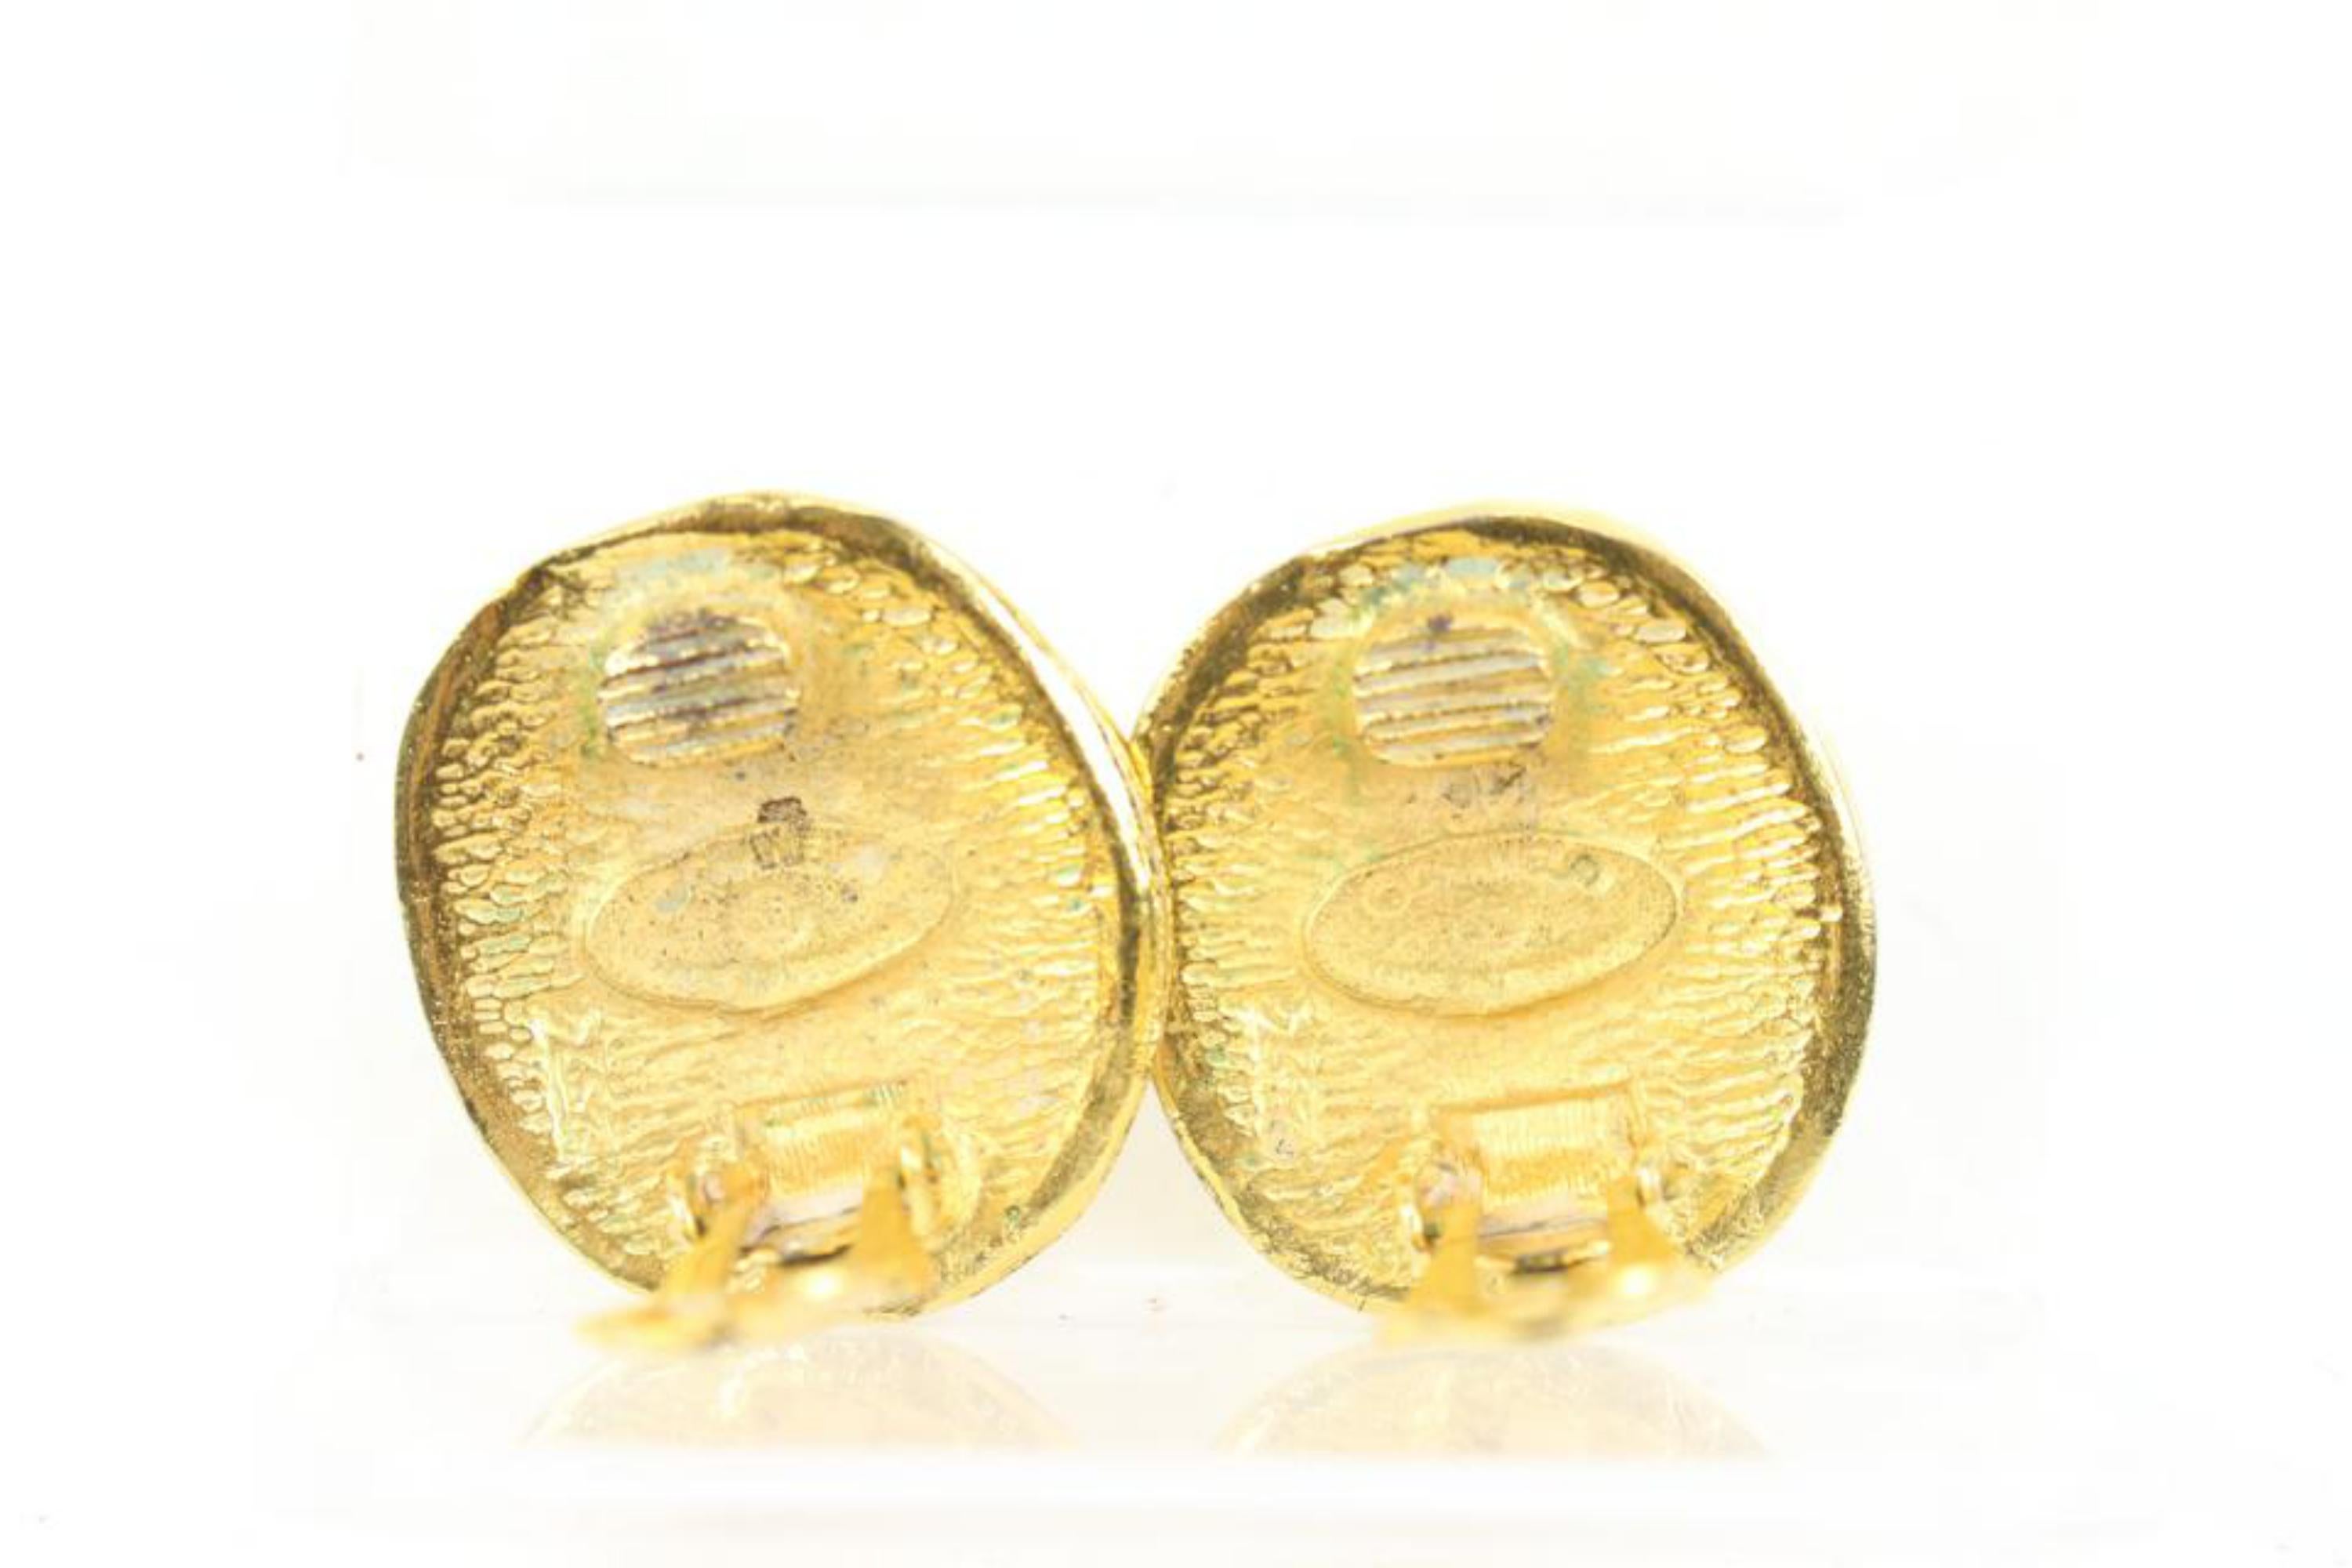 Chanel 1980's Hammered Gold 31 Rue Cambon Paris Earrings 71cz418s 7